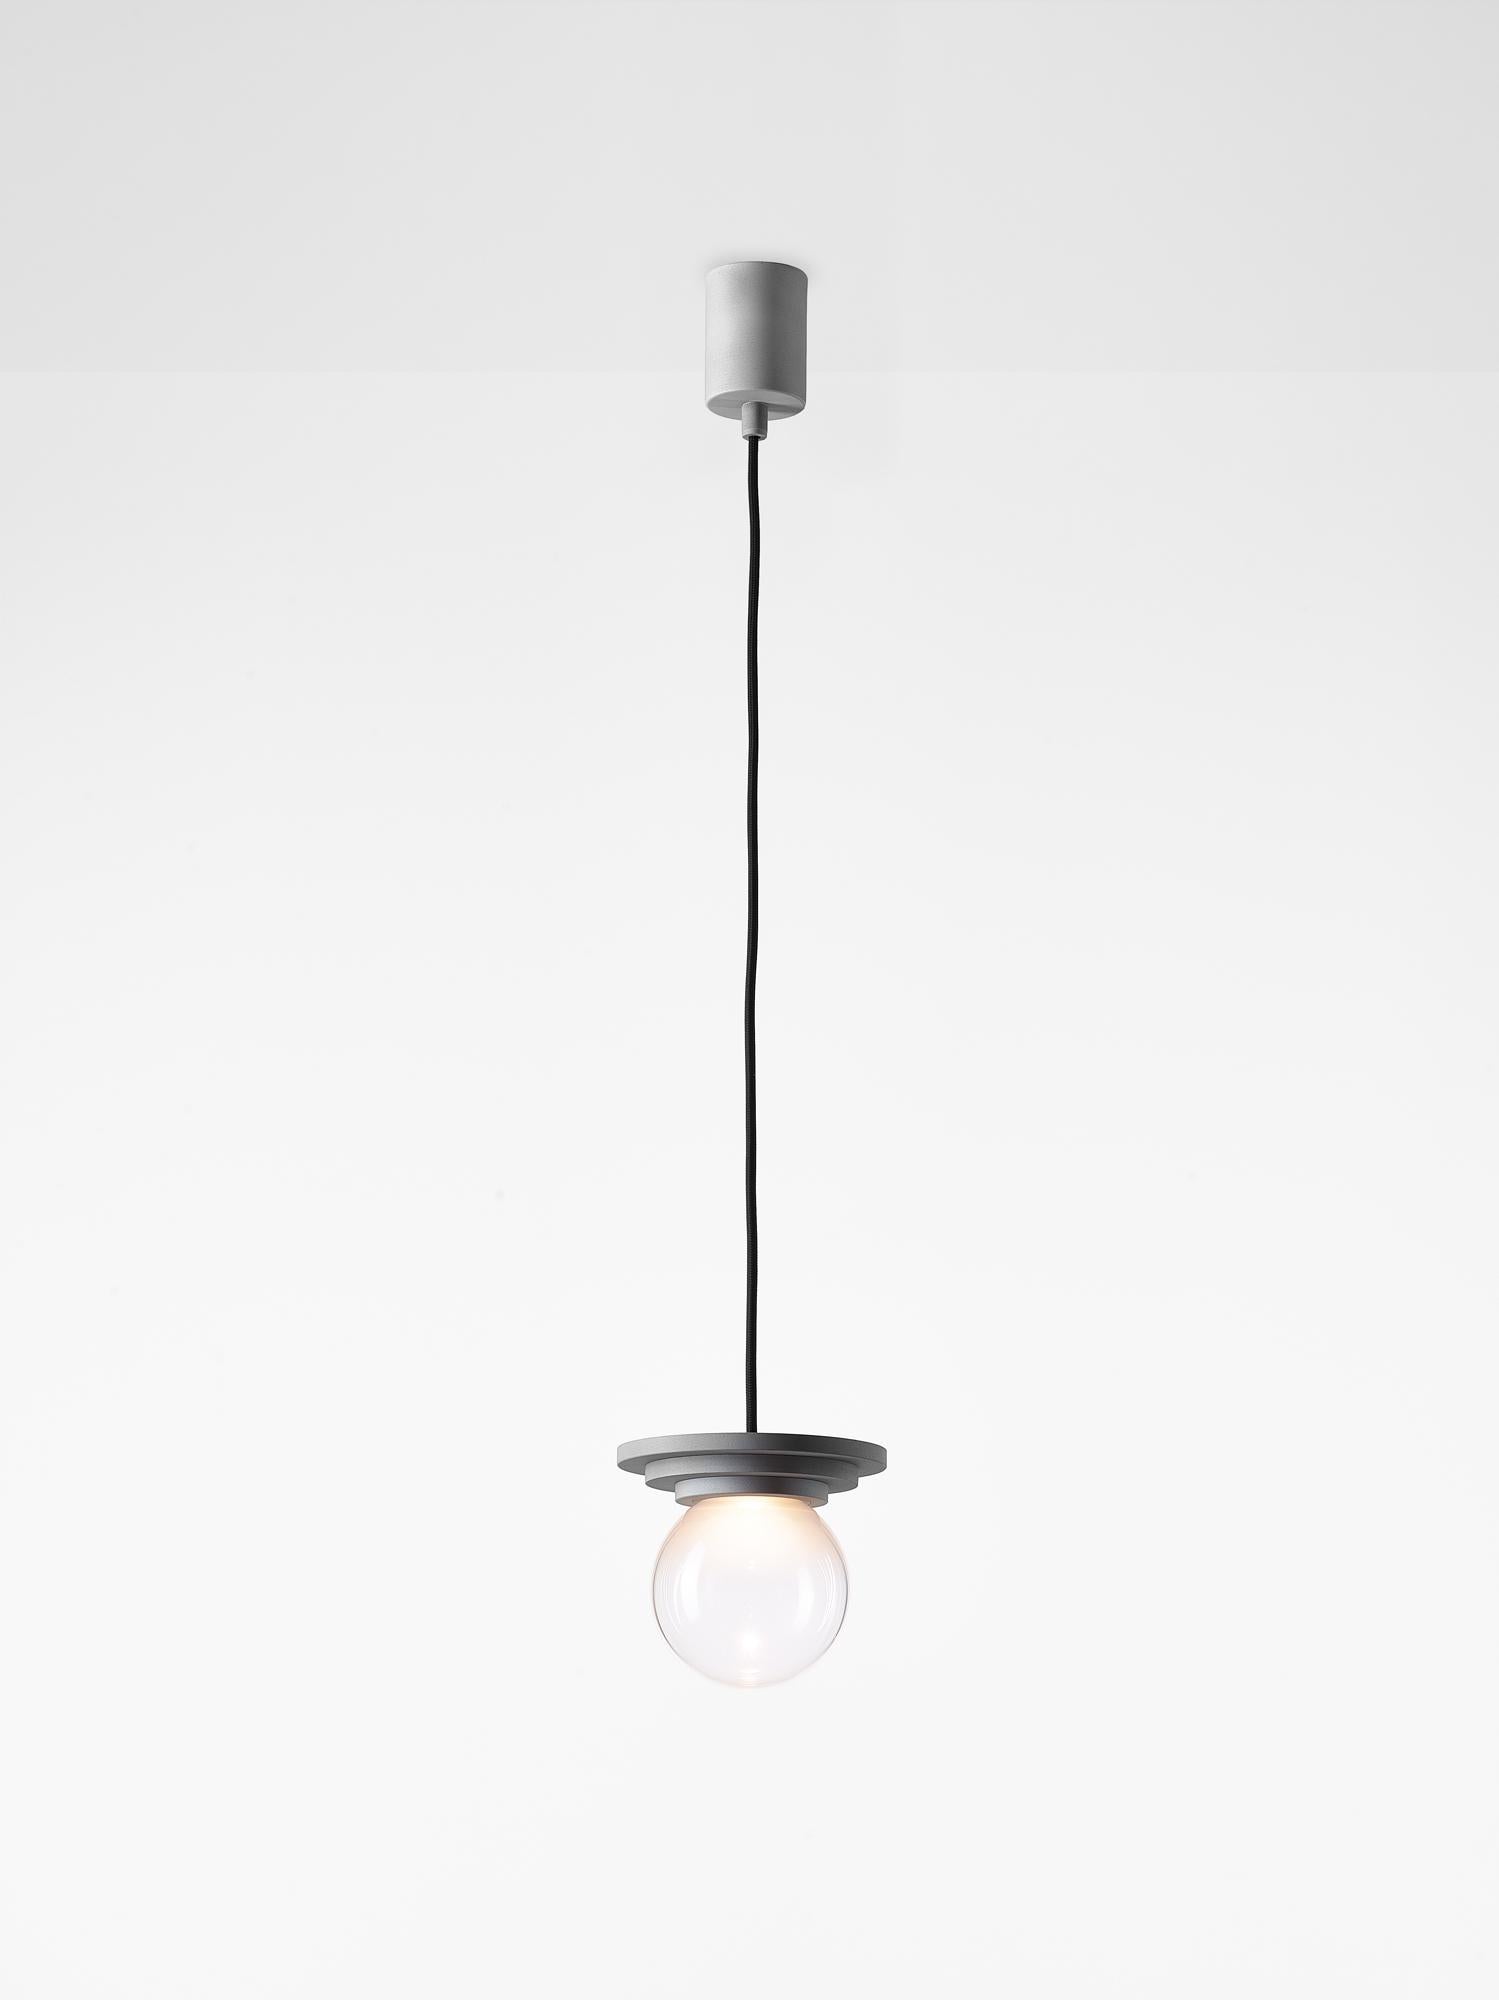 Silver Stratos mini ball pendant light by Dechem Studio
Dimensions: D 12 x H 14 cm
Materials: Aluminum, glass.
Also available: Different colours available

Different shapes of capsules and spheres contrast with anodized alloy fixtures, creating